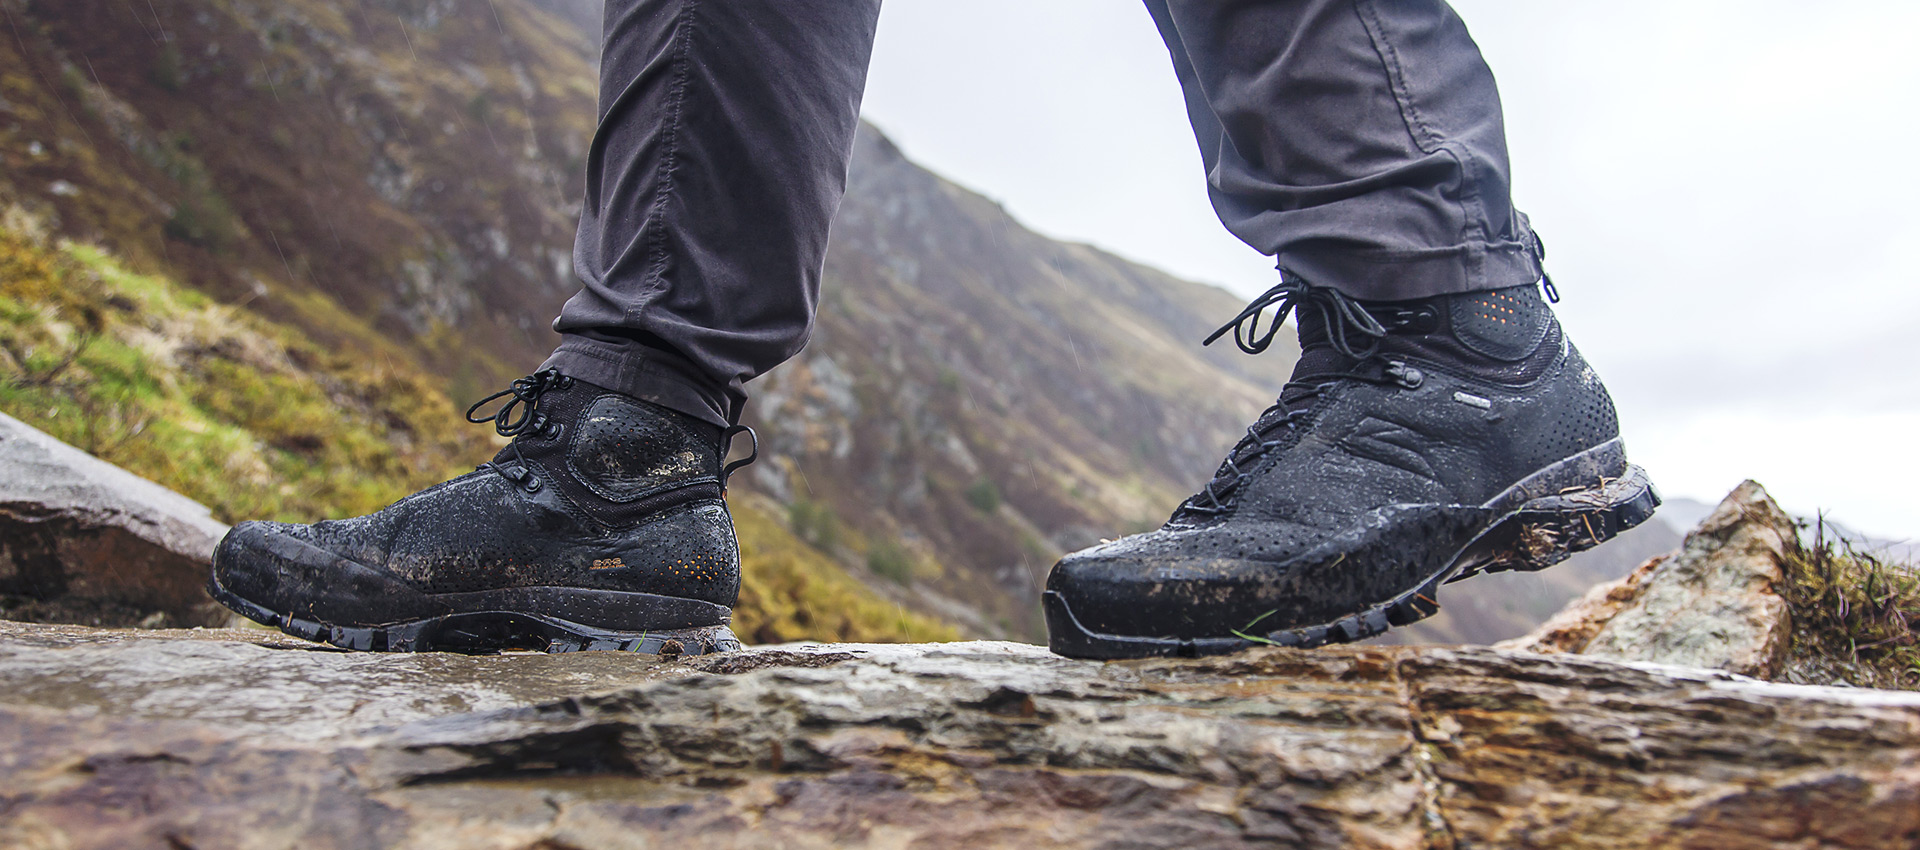 The Best Walking Boots For Men 